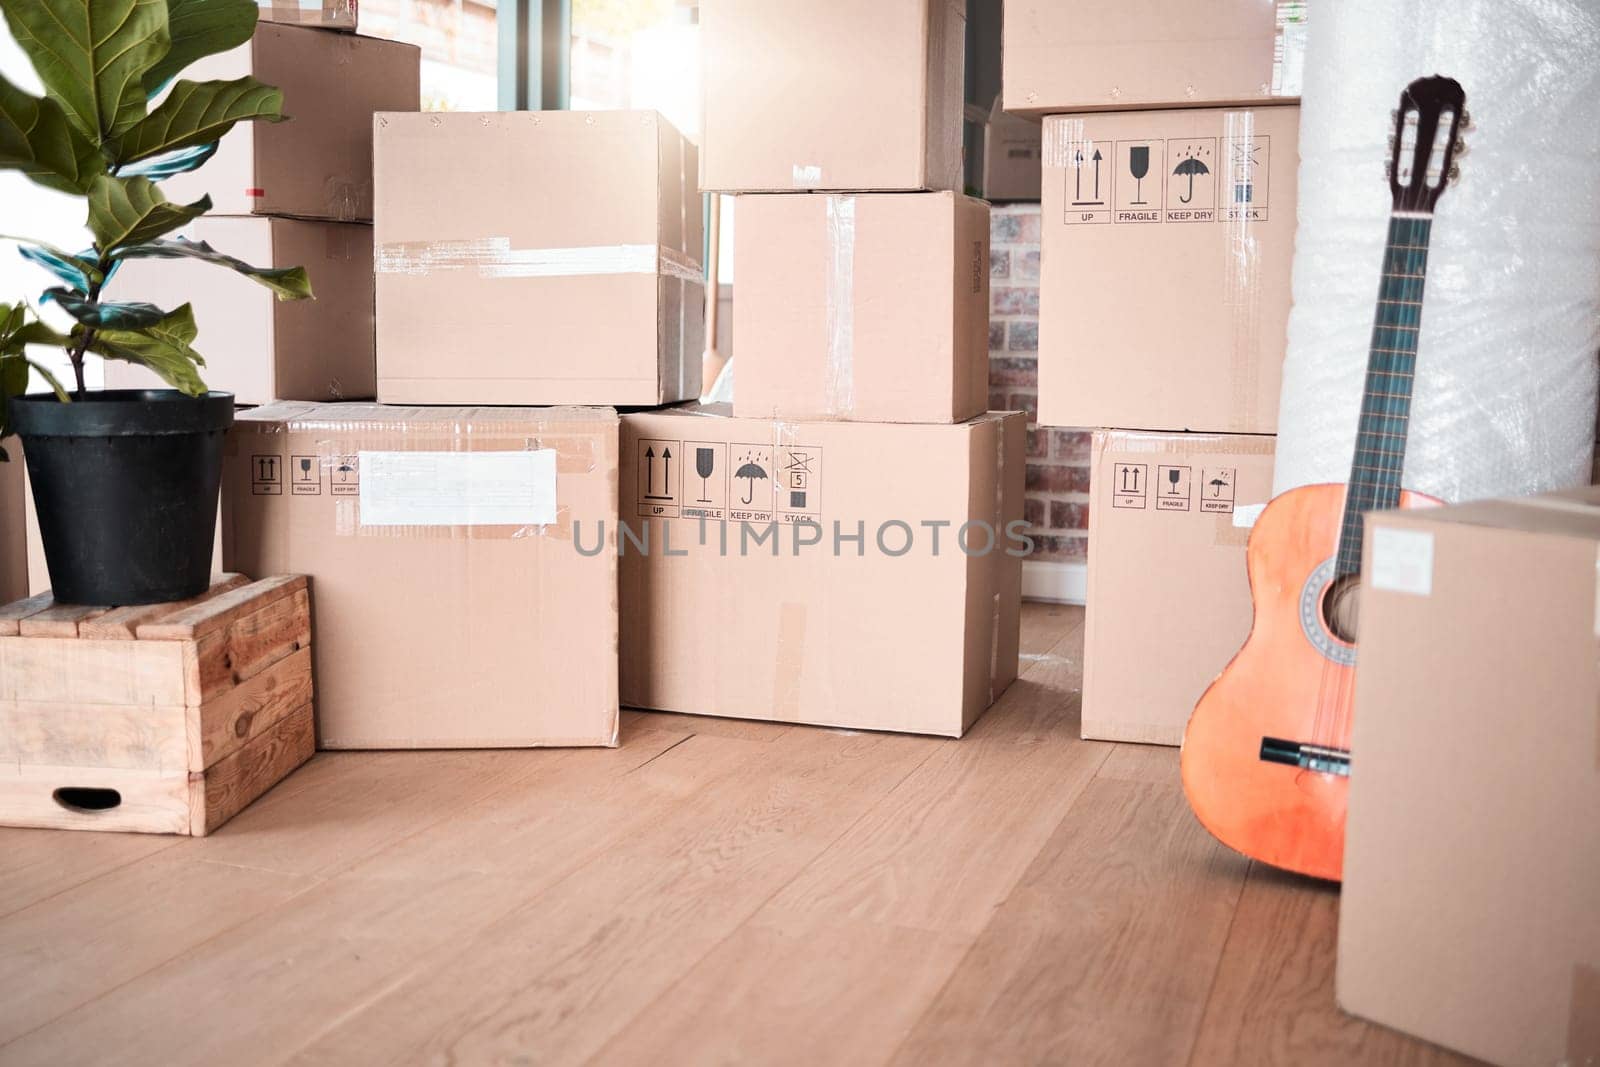 Interior, storage and box by plant in new house, apartment or property for moving, relocating or purchase a home. Shipping, real estate or mortgage for renovation with guitar in space, lounge or room by YuriArcurs